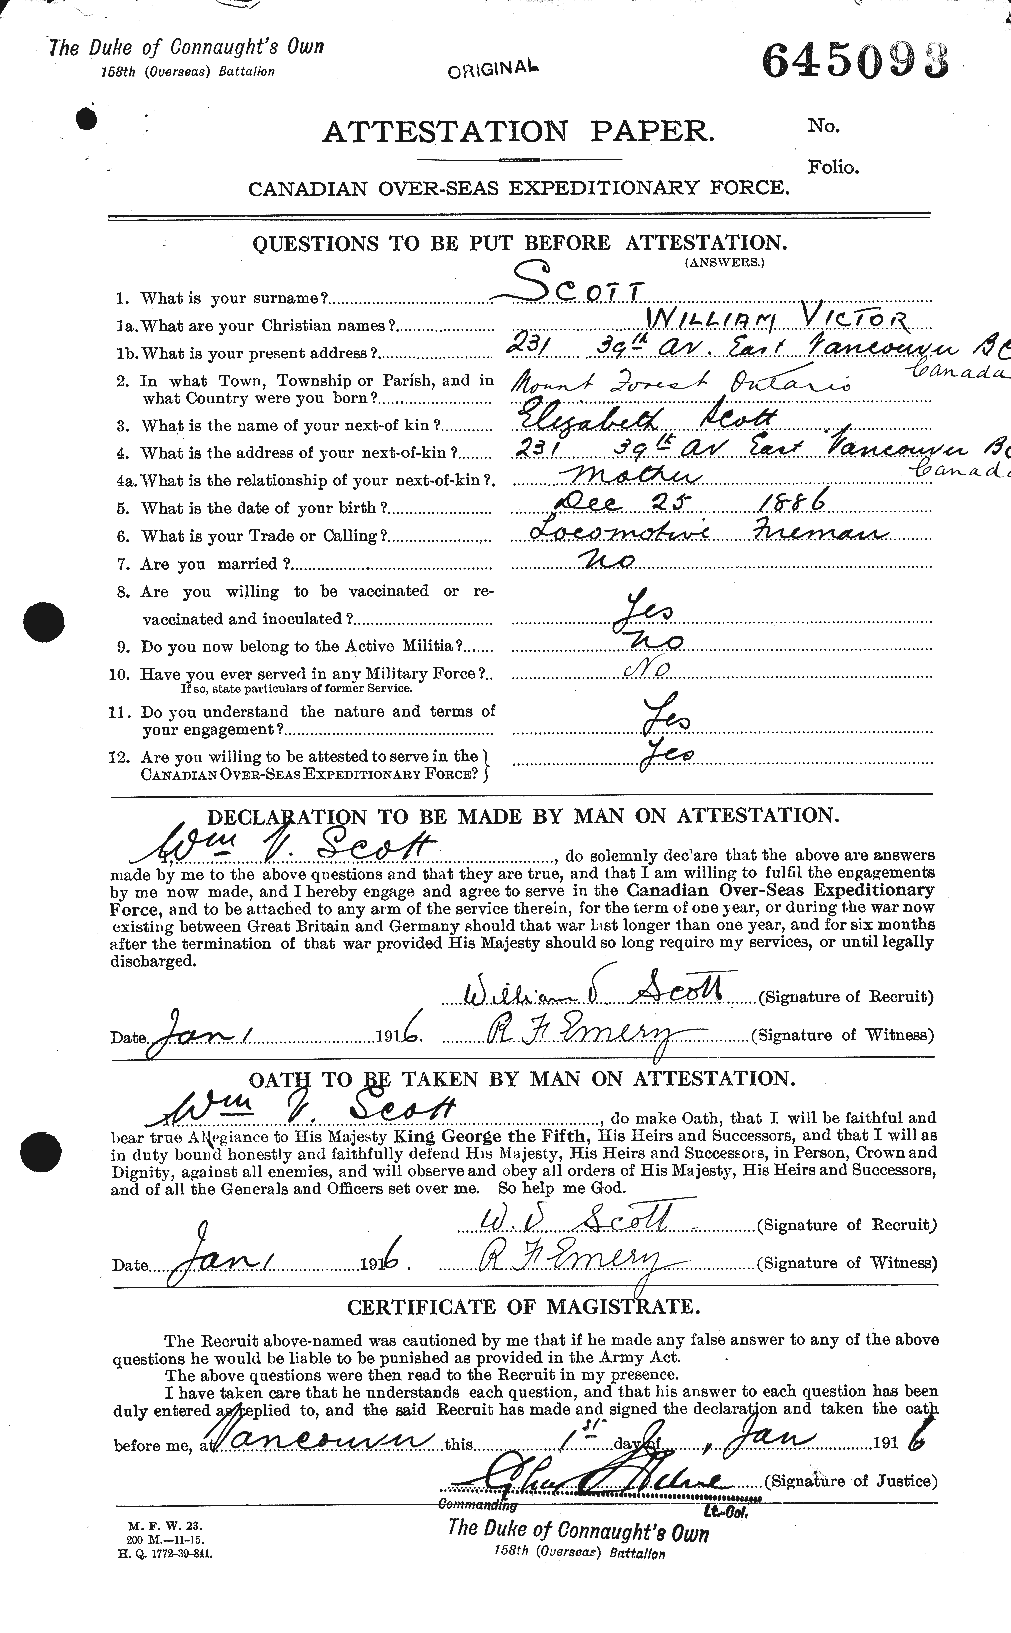 Personnel Records of the First World War - CEF 087254a